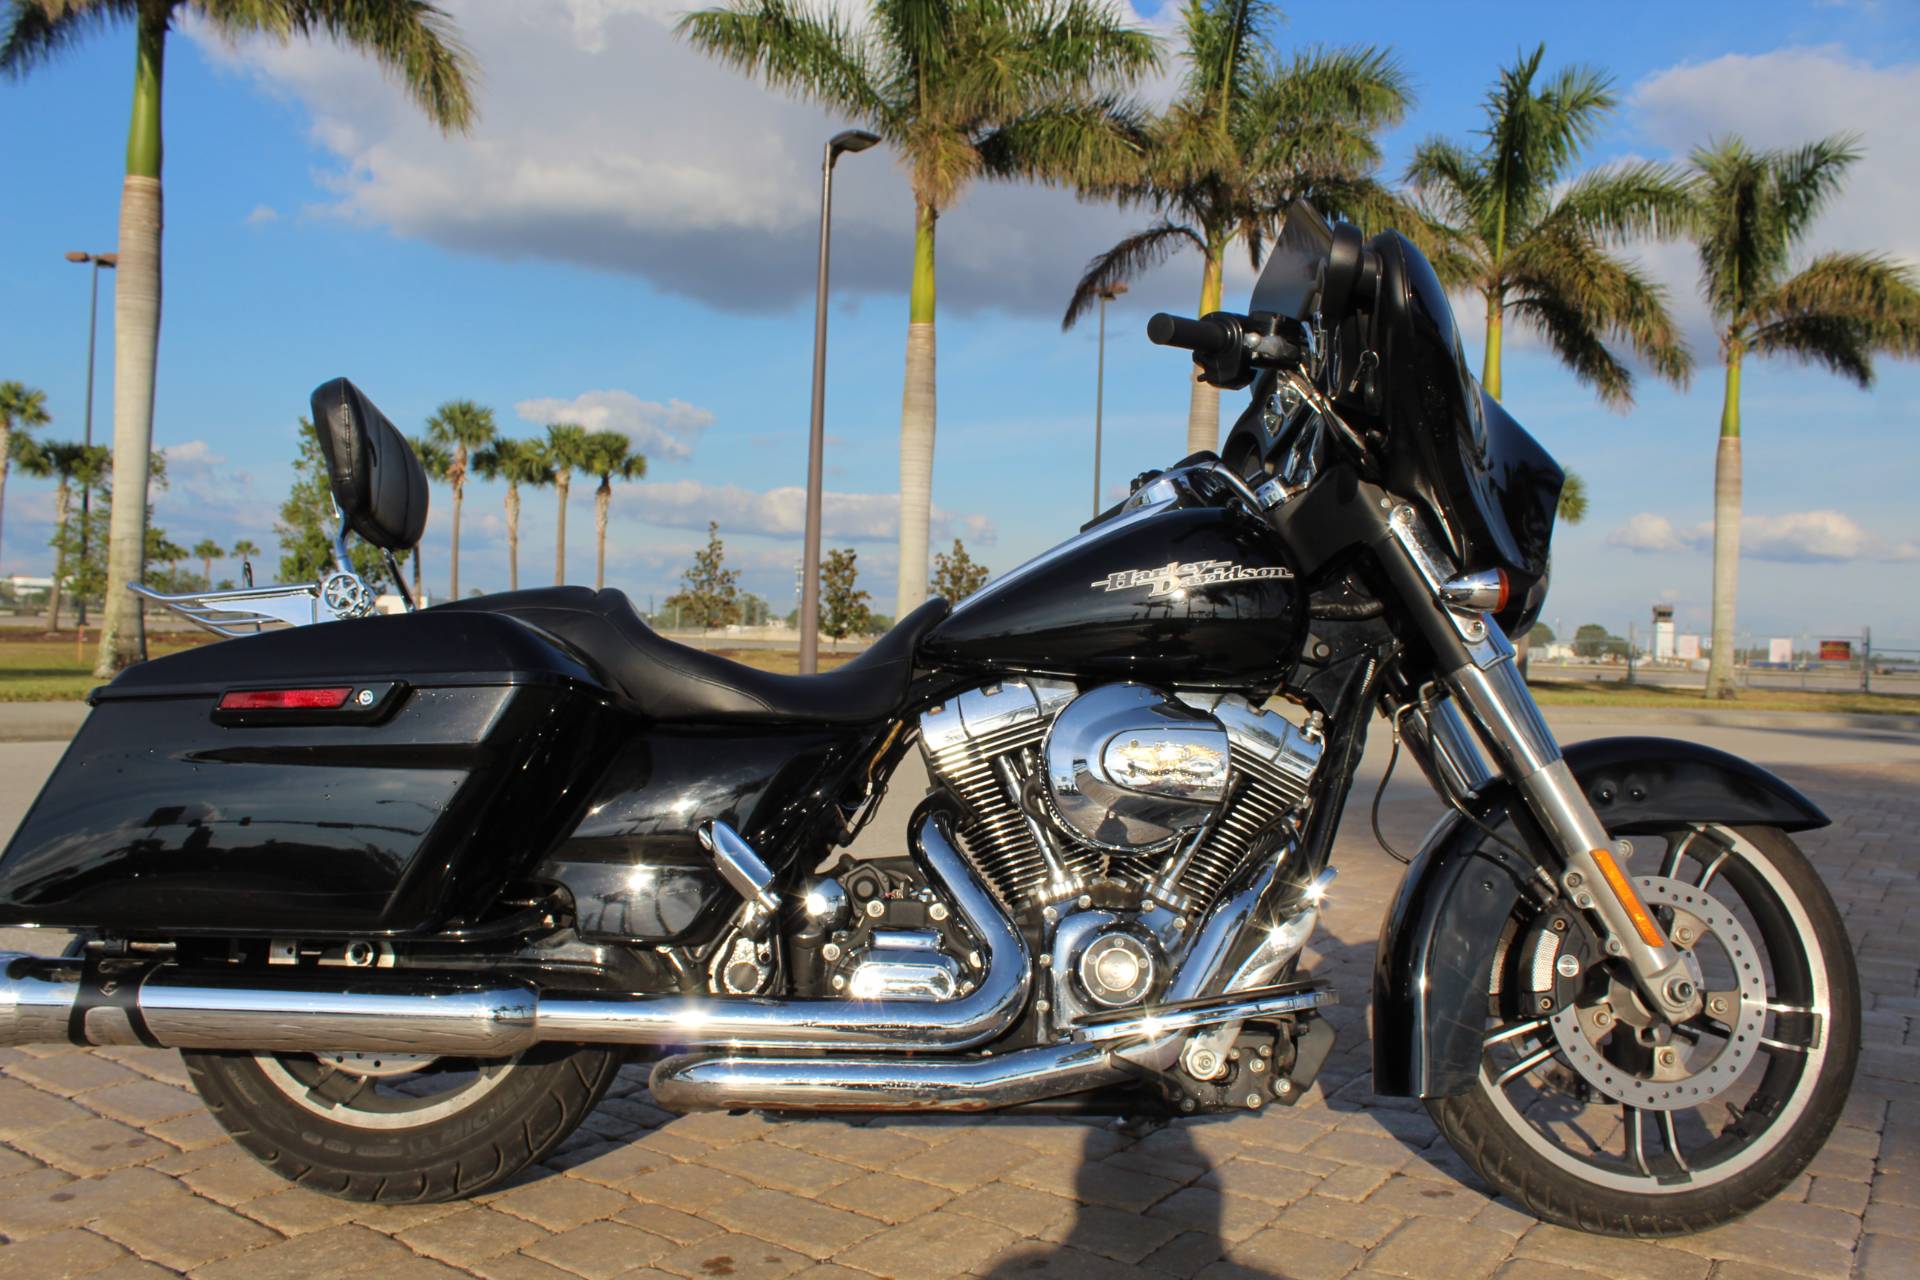 Used 2014 Harley Davidson Street Glide Motorcycles In Fort Myers Fl Stock Number 684644